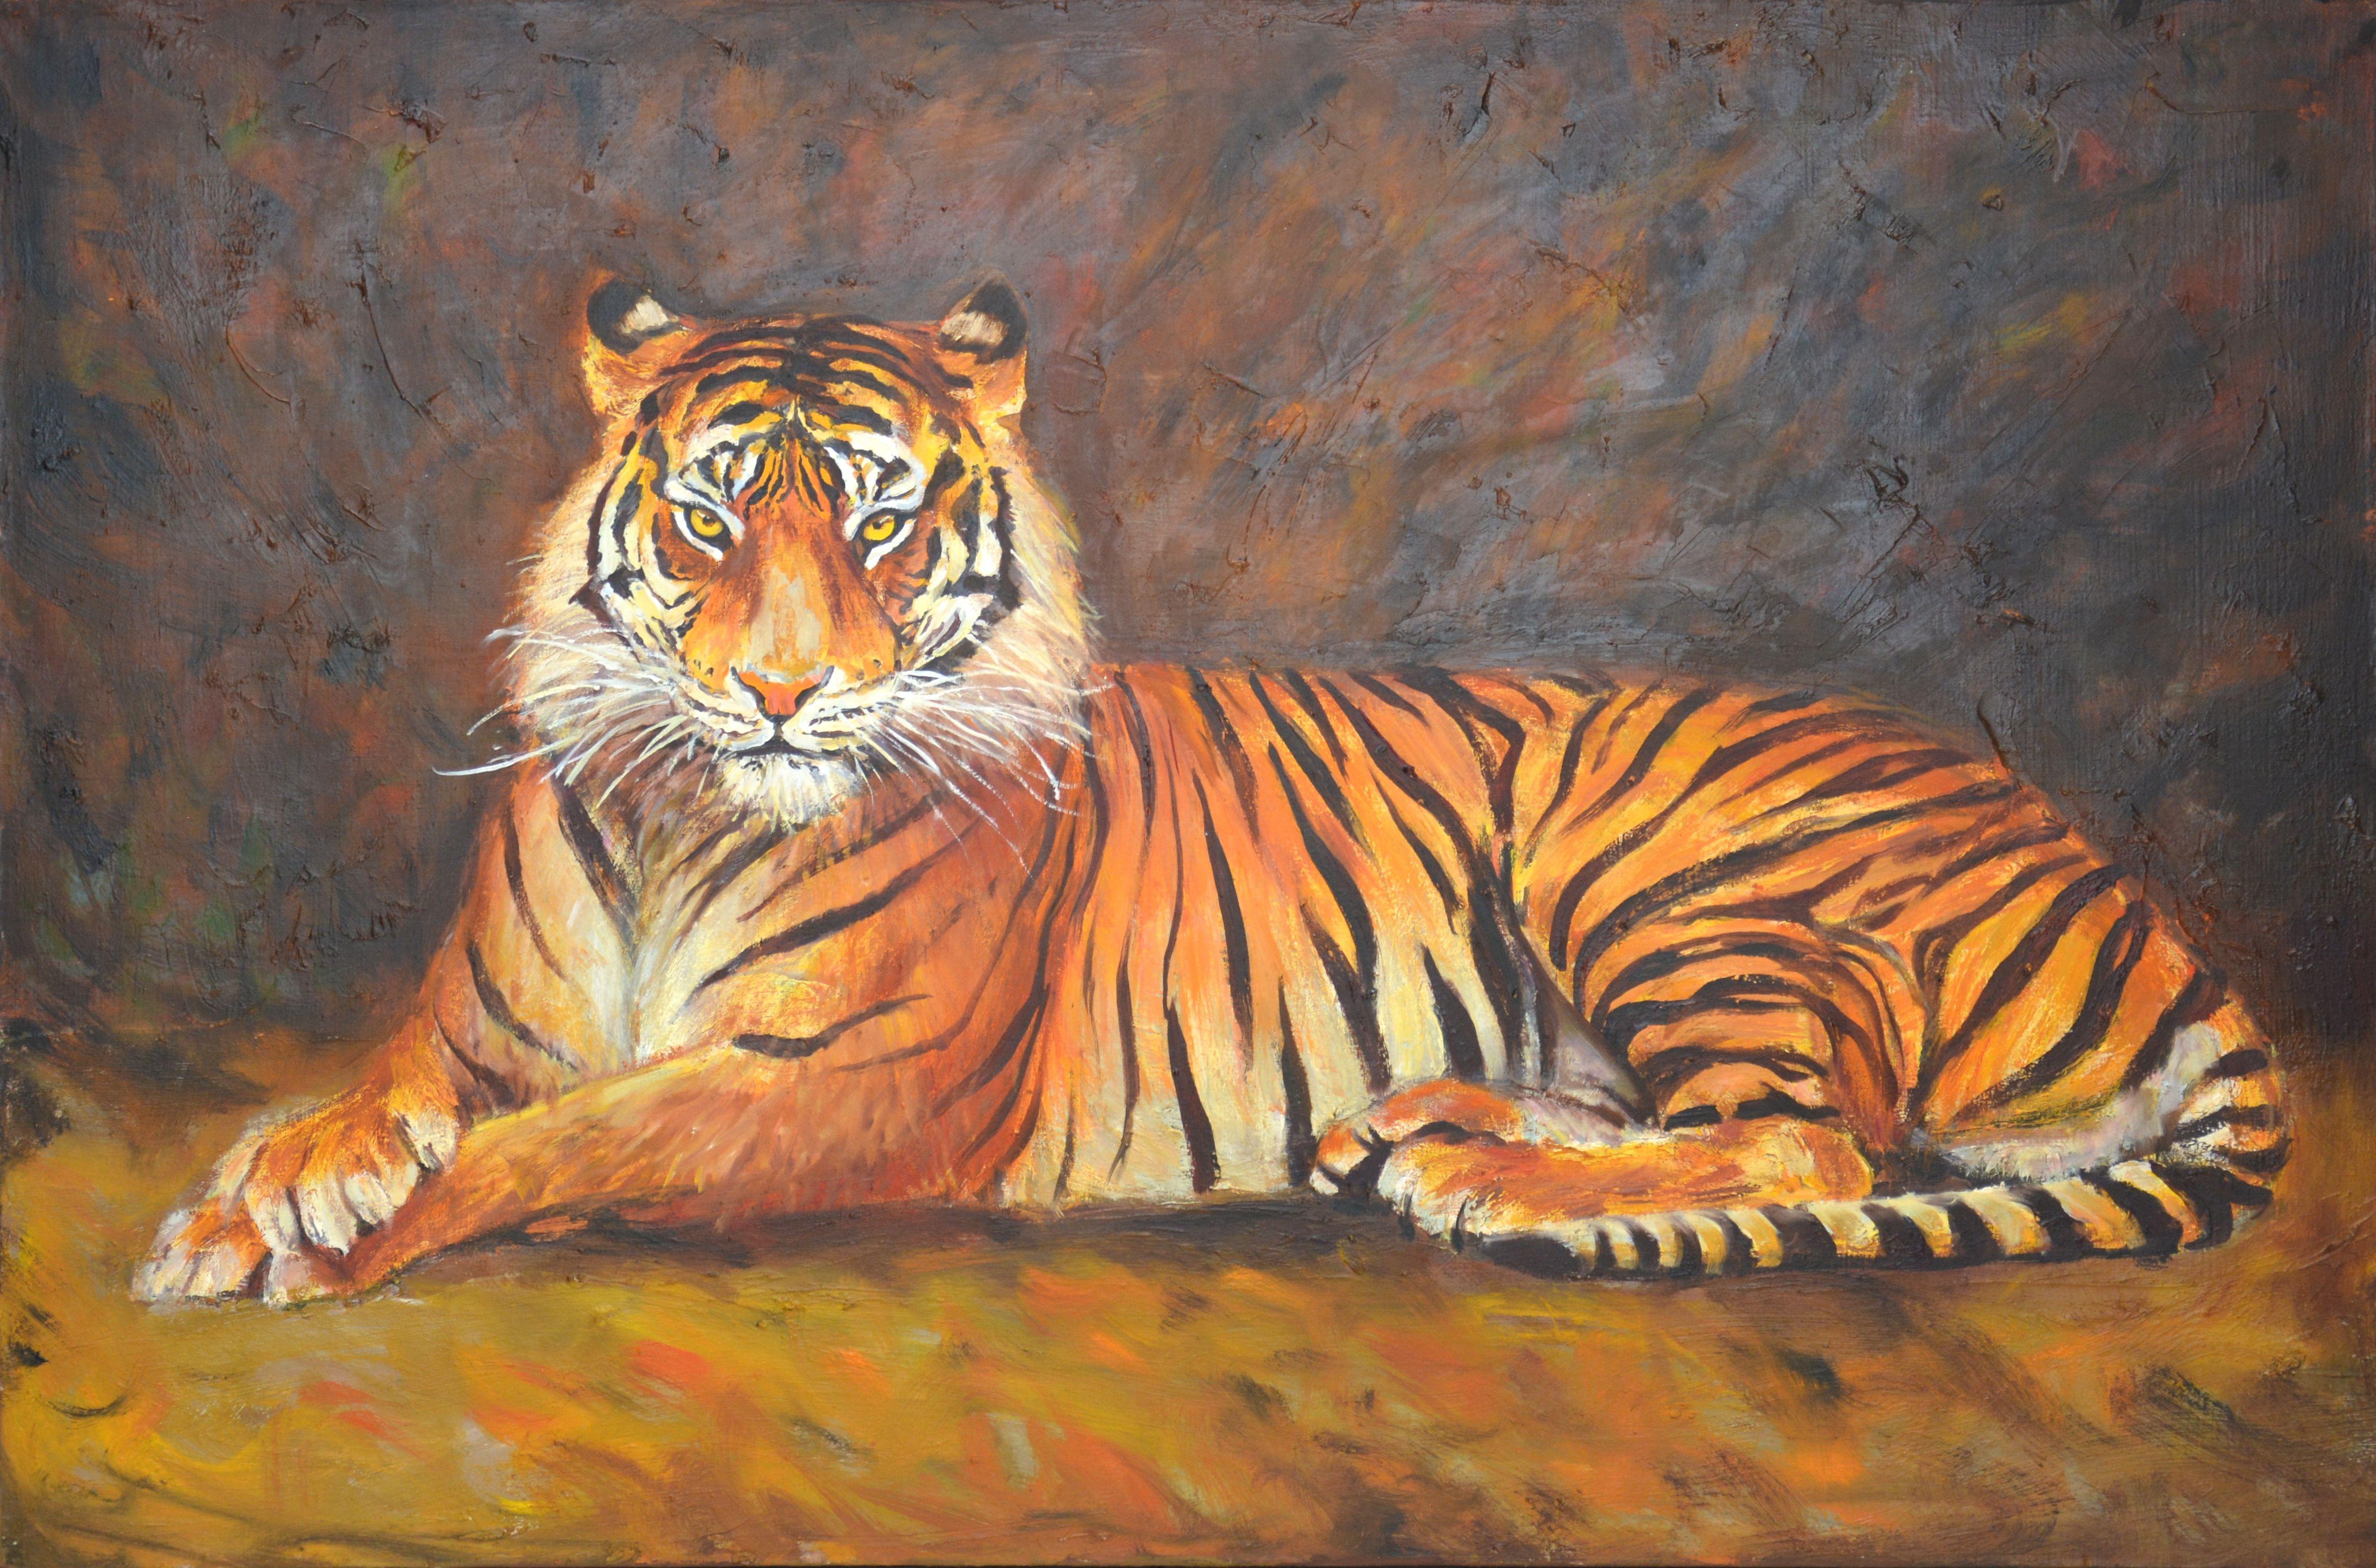 Tiger, Painting, Oil on Canvas